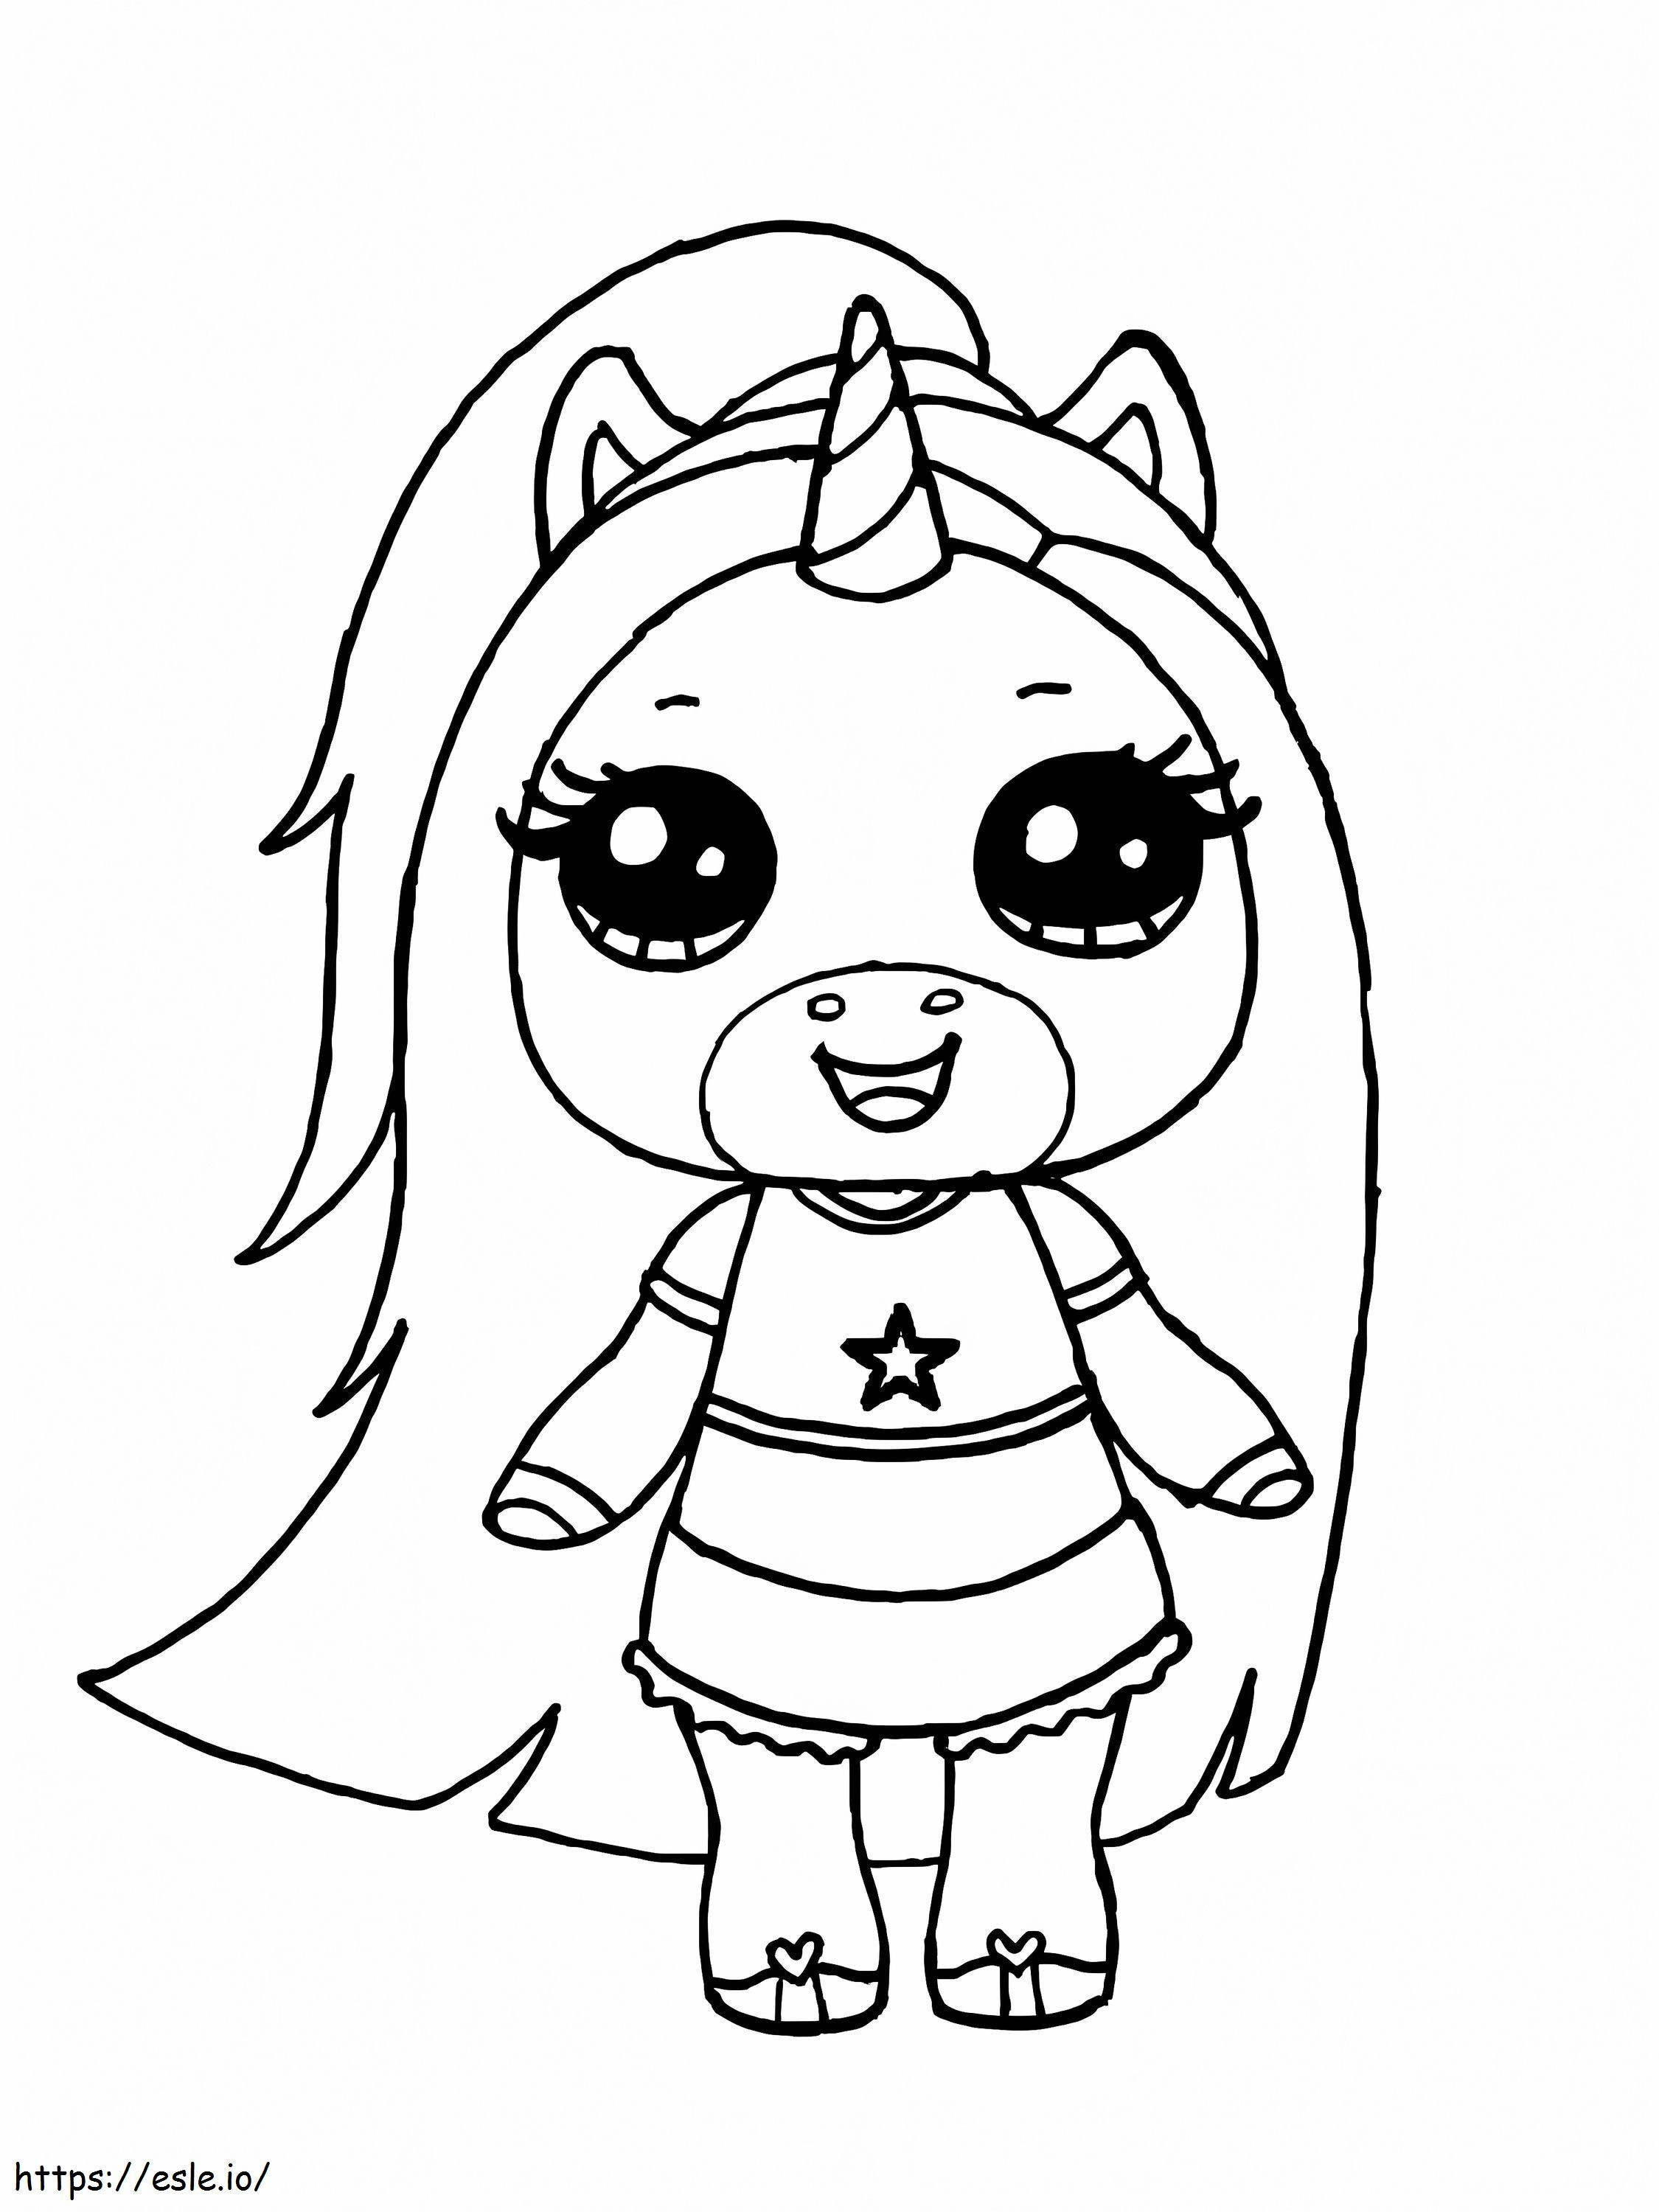 Unicorn Poopsie coloring page